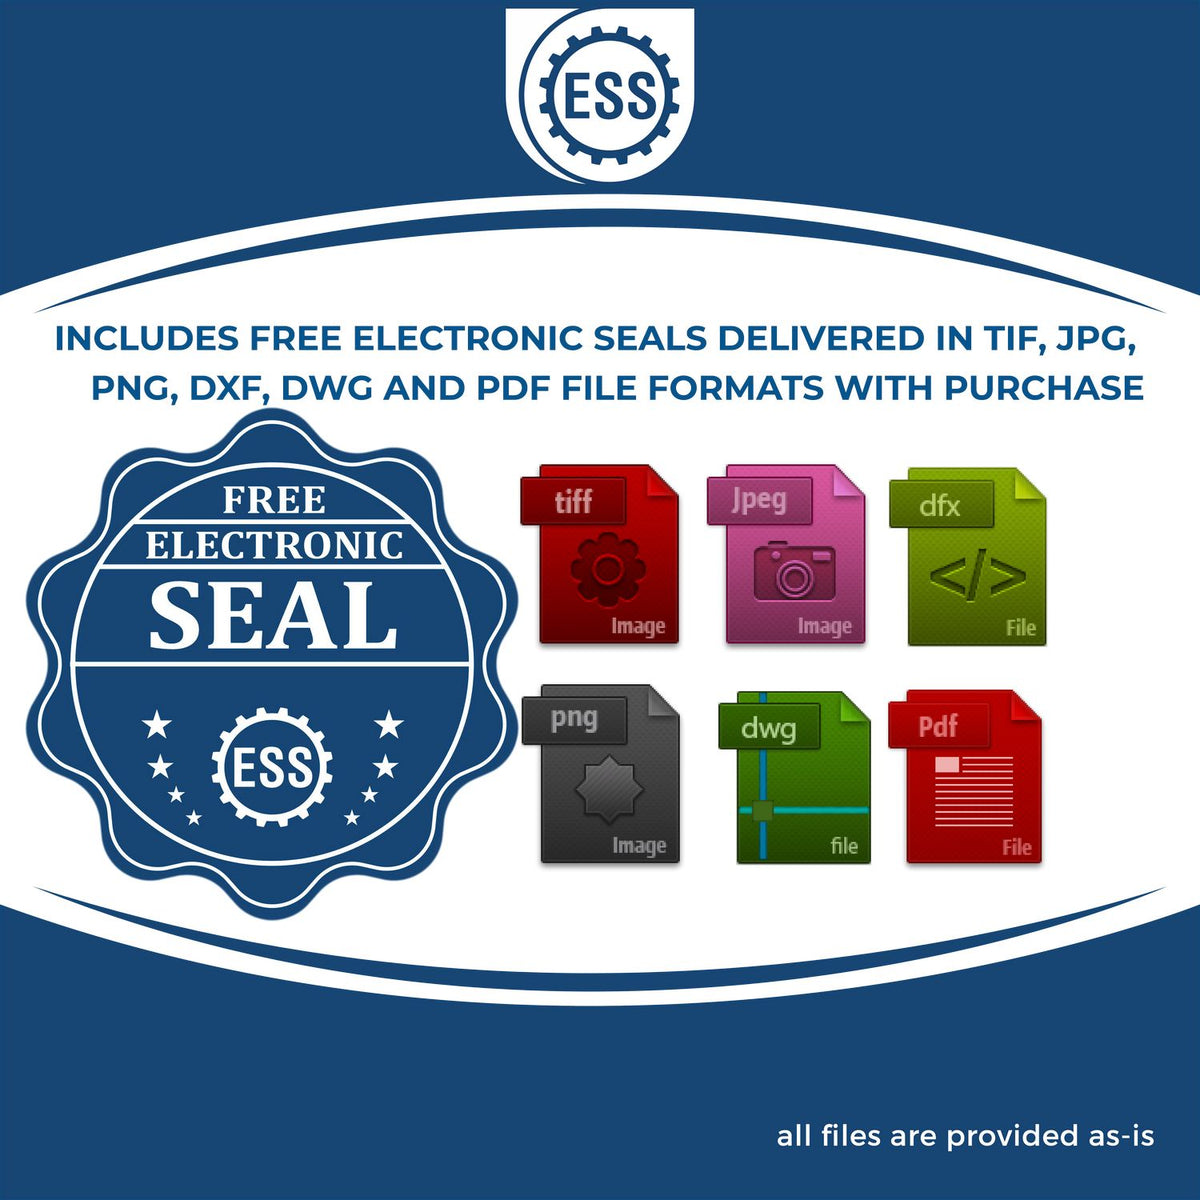 An infographic for the free electronic seal for the Hybrid Massachusetts Engineer Seal illustrating the different file type icons such as DXF, DWG, TIF, JPG and PNG.